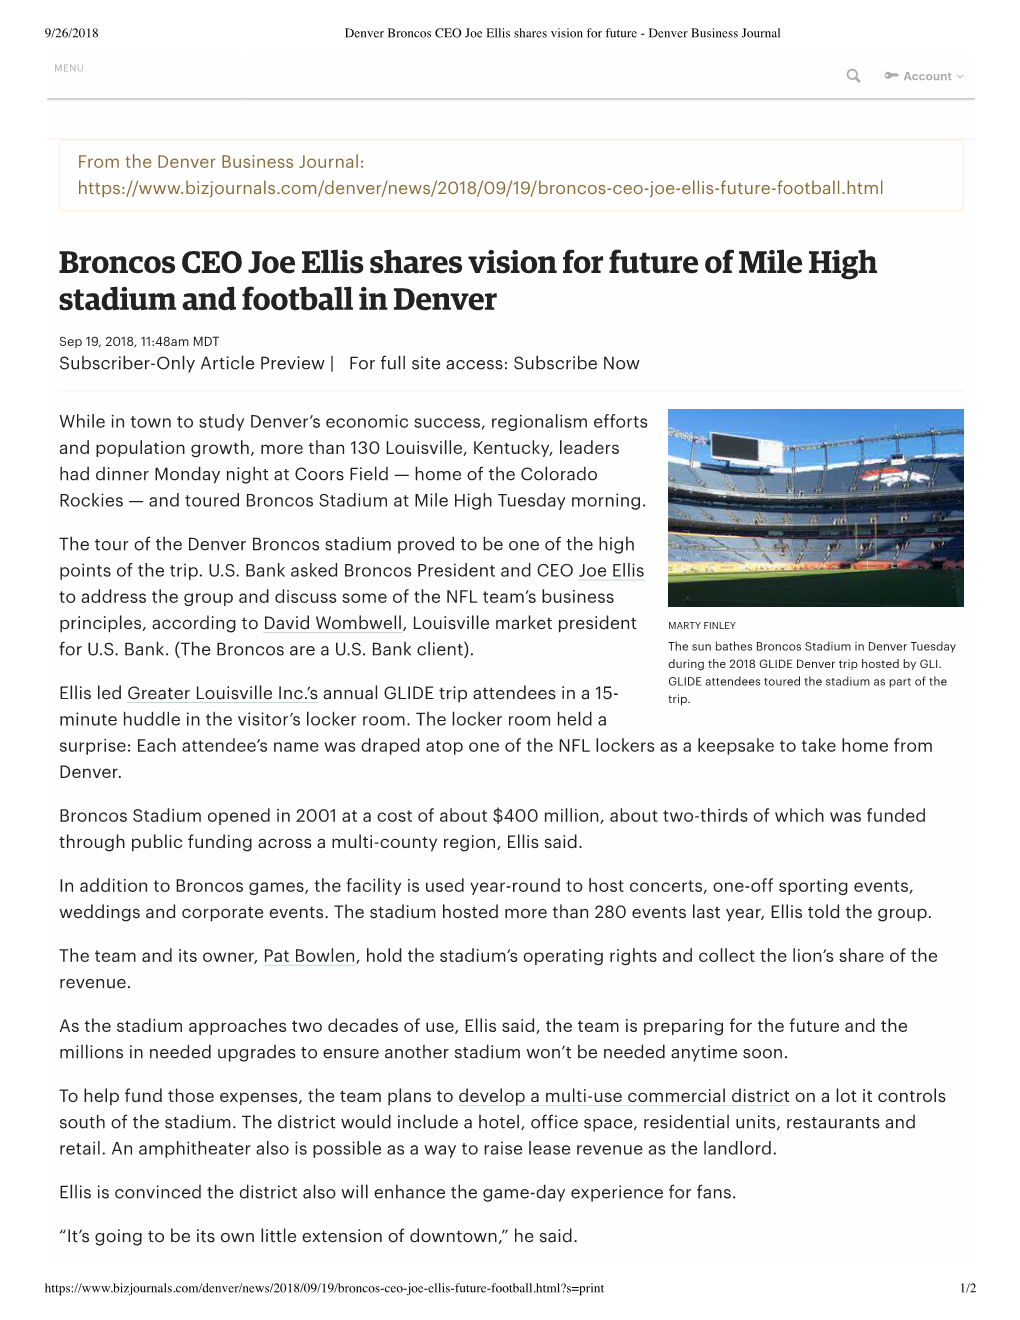 Broncos CEO Joe Ellis Shares Vision for Future of Mile High Stadium and Football in Denver